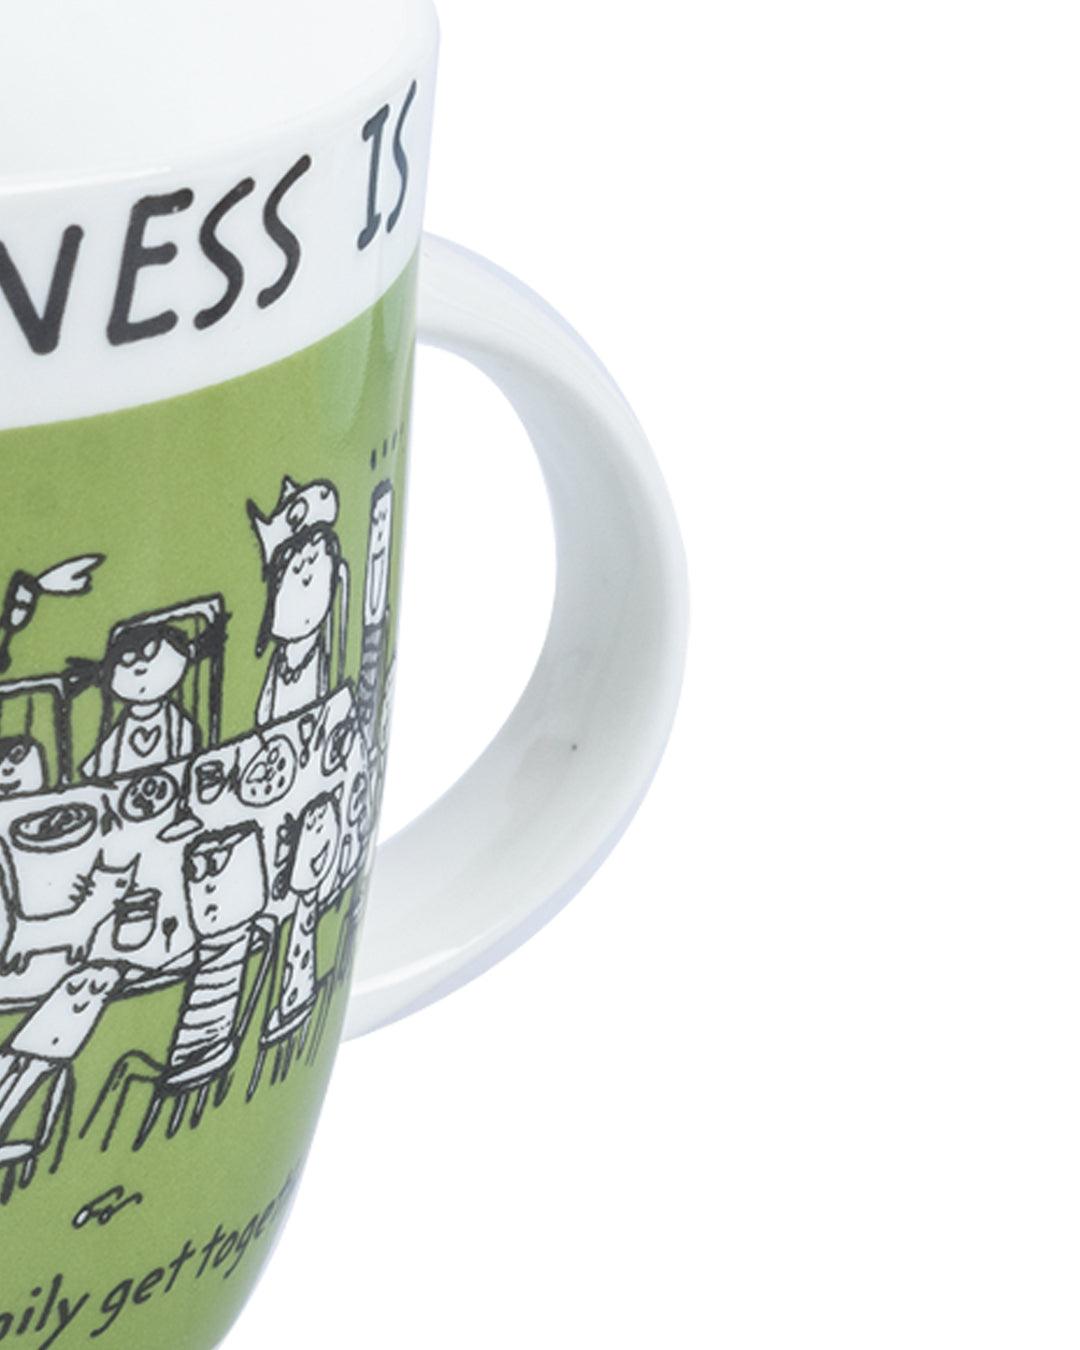 Market 99 - 'HAPPINESS IS … a big, chaotic family get together' Graphic Print Ceramic Tea, Milk & Coffee Mugs (Set of 2, 340 mL) - MARKET 99